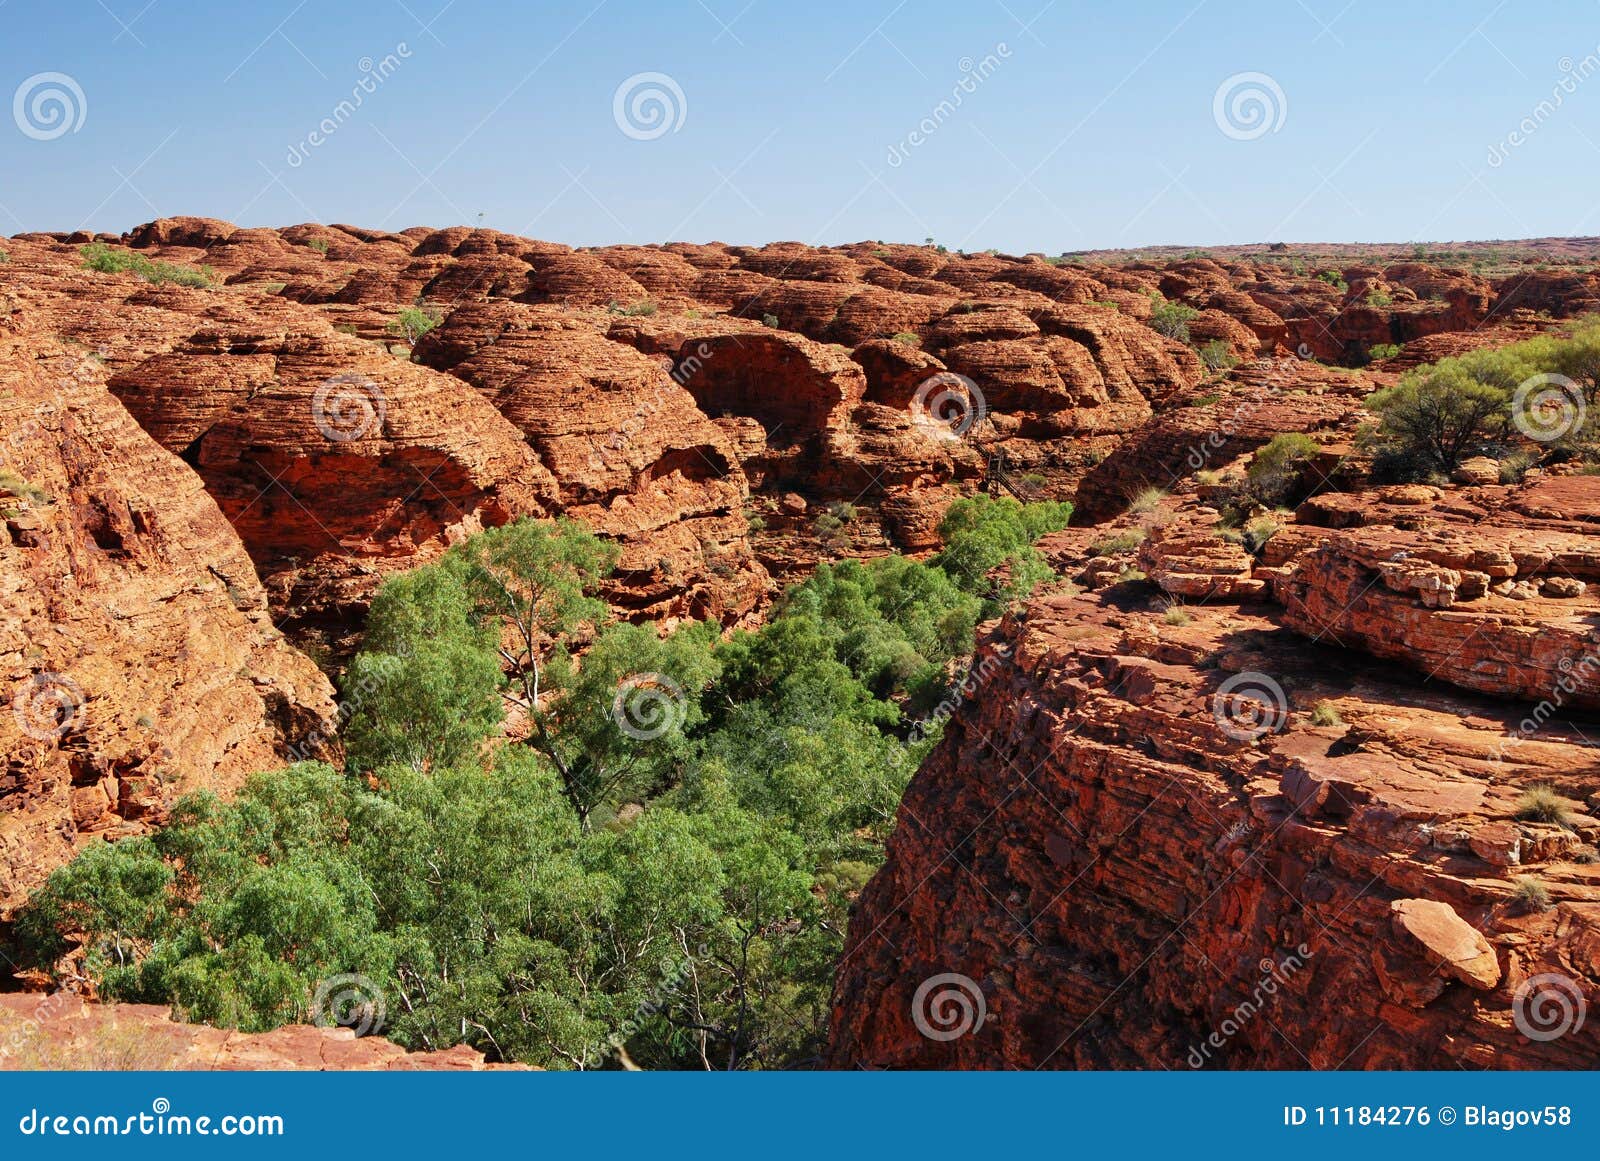 the beehive domes above kings canyon